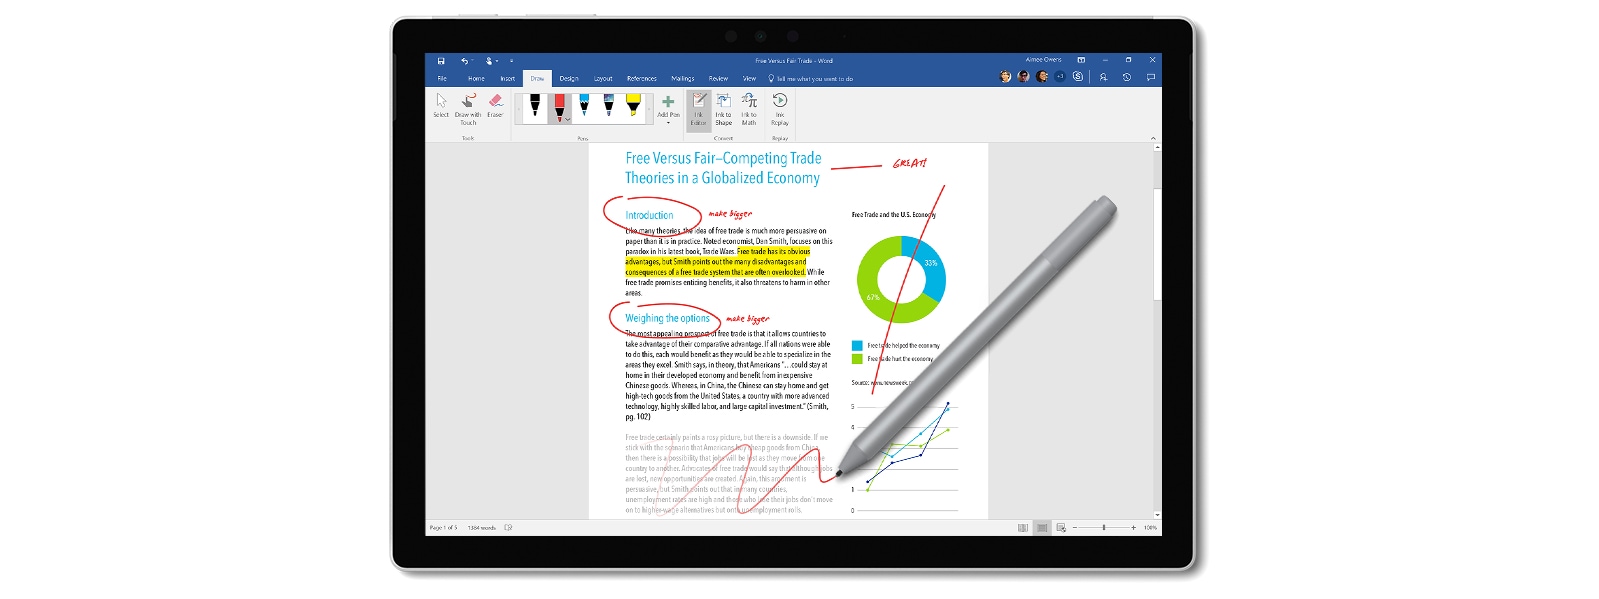 Surface Pro with Surface pen